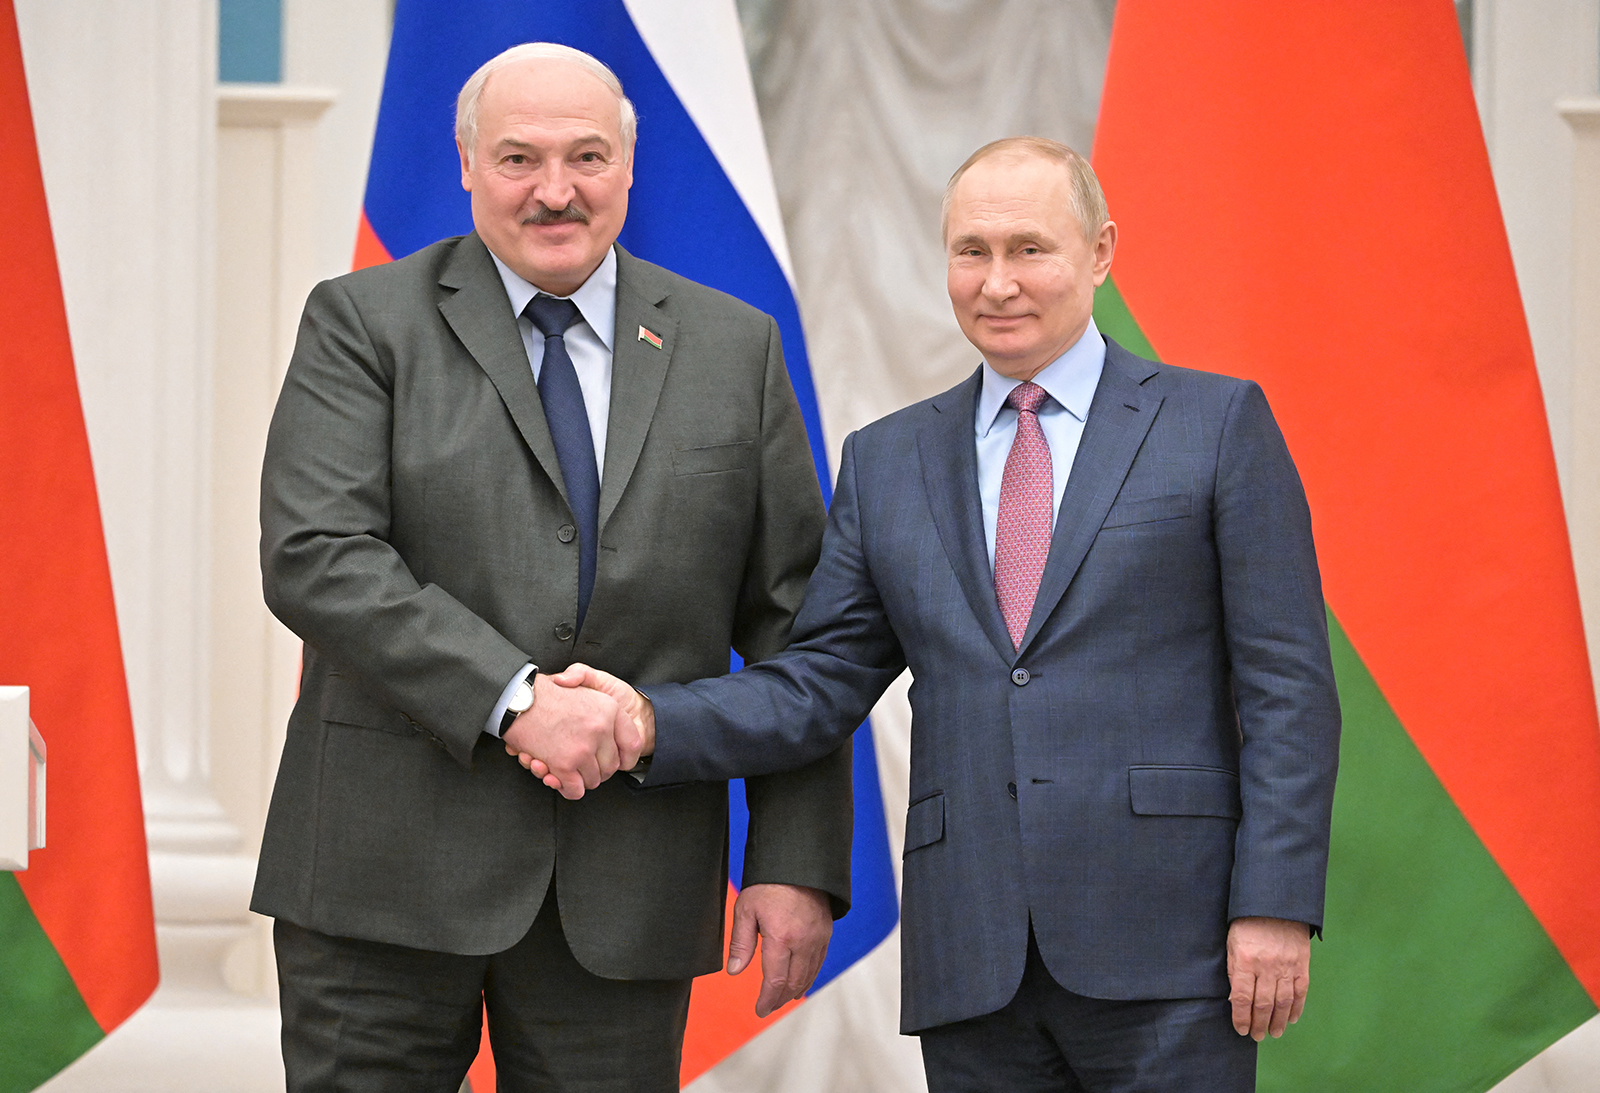 Russian President Vladimir Putin and Belarusian President Alexander Lukashenko shake hands during a joint news conference in Moscow, Russia, on February 18.